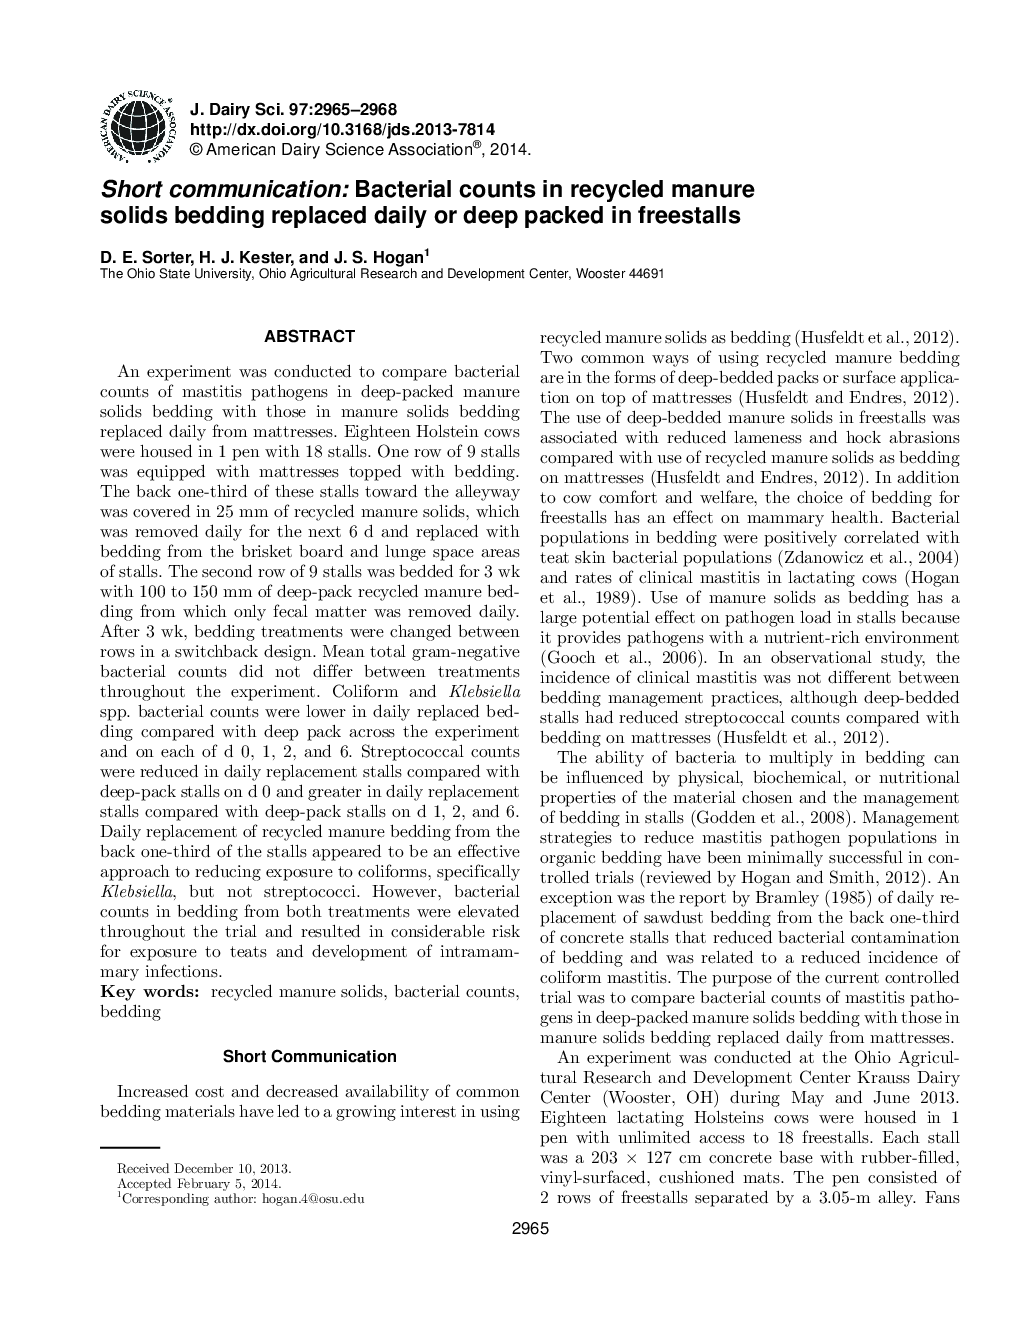 Short communication: Bacterial counts in recycled manure solids bedding replaced daily or deep packed in freestalls